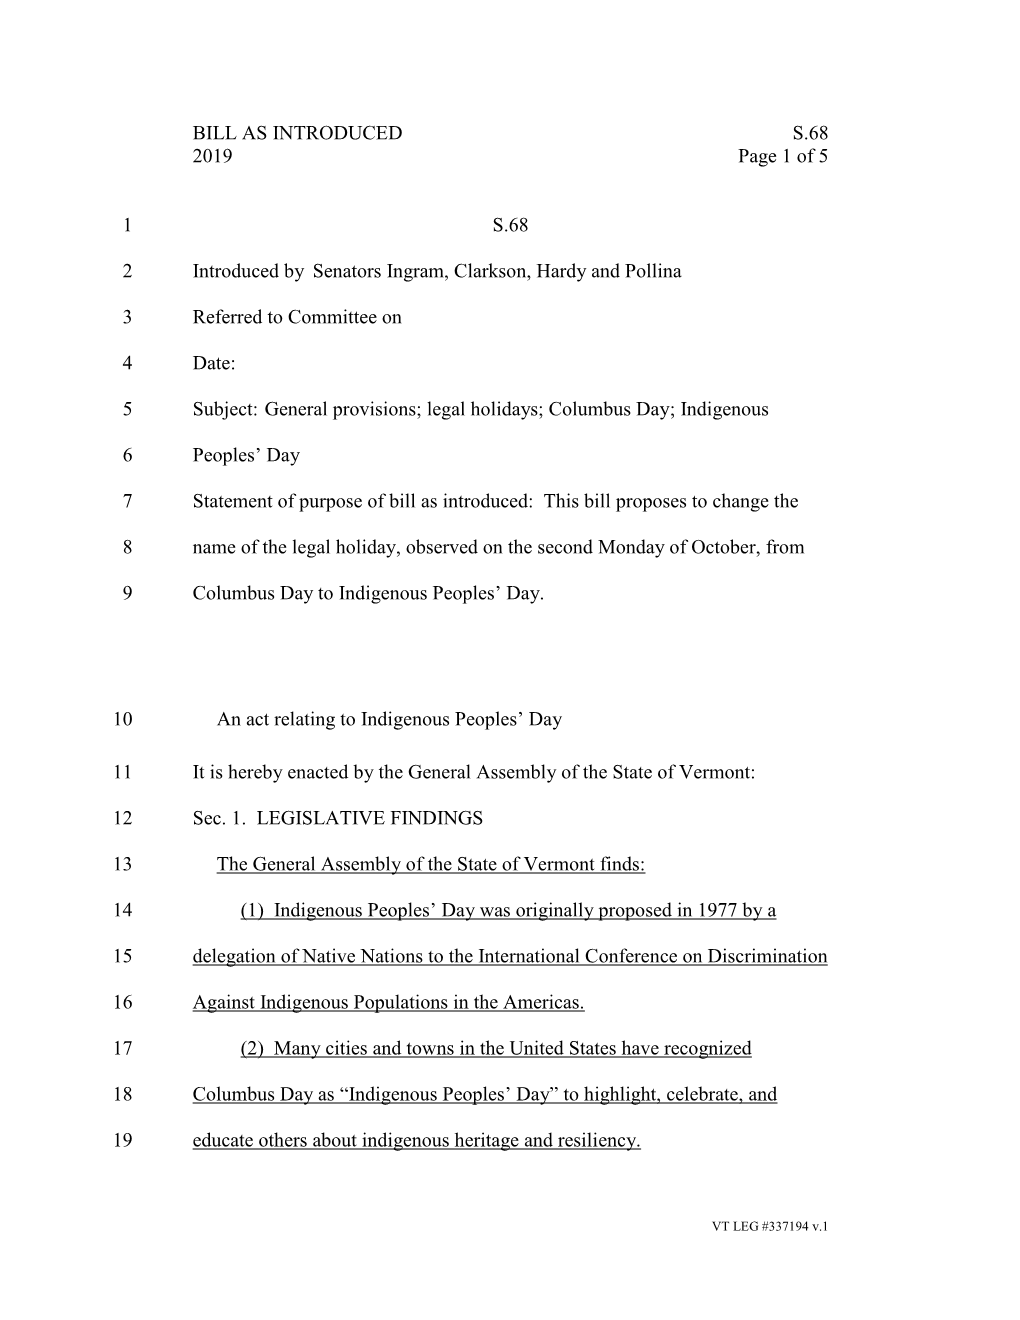 AS INTRODUCED S.68 2019 Page 1 of 5